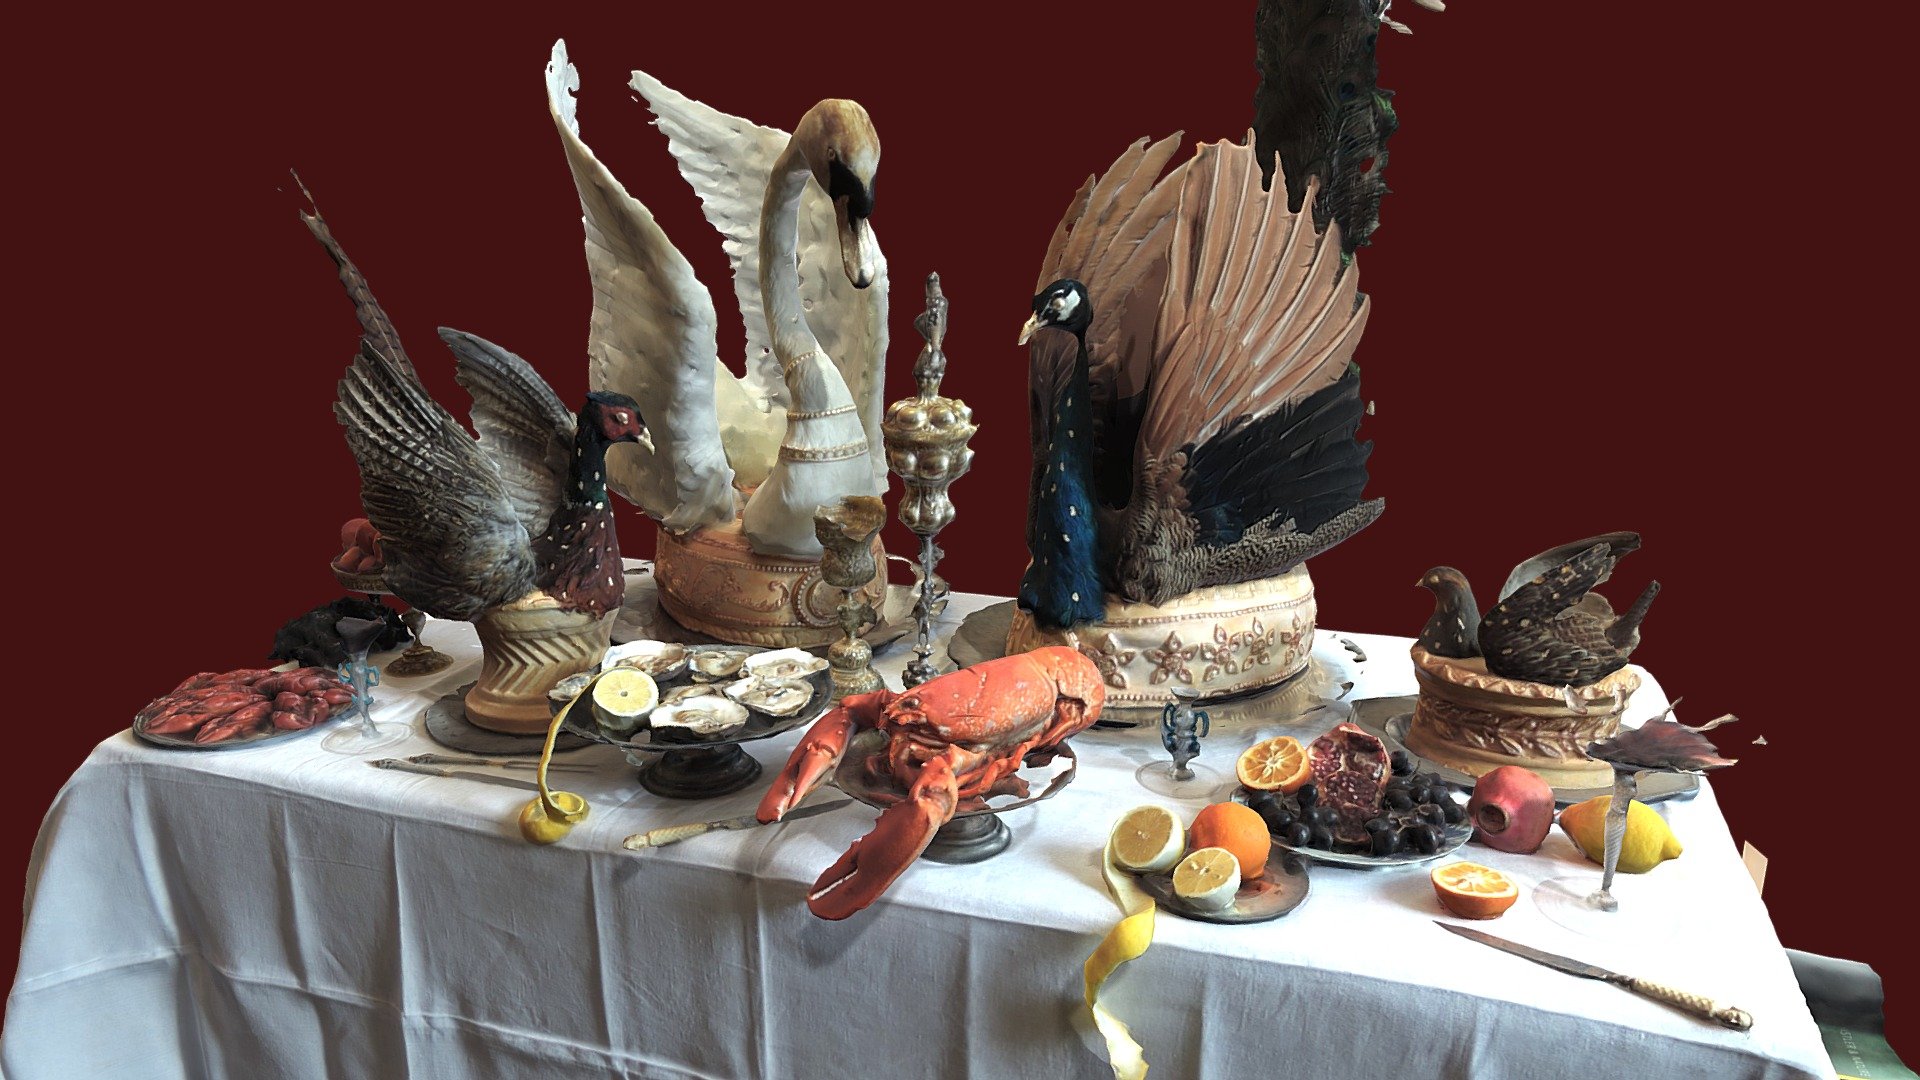 A 3d scan made from photos taken in 2019 by Abi Glen and Jennifer Wexler whilst on the AHRC post doctoral creative economy engagement fellowships. Processed in November 2022 by Daniel Pett in Capturing Reality. This represents a Baroque dining table scene from the Feast and Fast exhibition held at the Fitzwilliam Museum in 2019-2020 curated by Vicky Avery and Melissa Calaresu. The table is the work of the great Ivan Day.

450 images, taken in the Syndicate Room of the Fitzwilliam Museum. Thanks to Mike Jones and team for their help and museum technicians 3d model